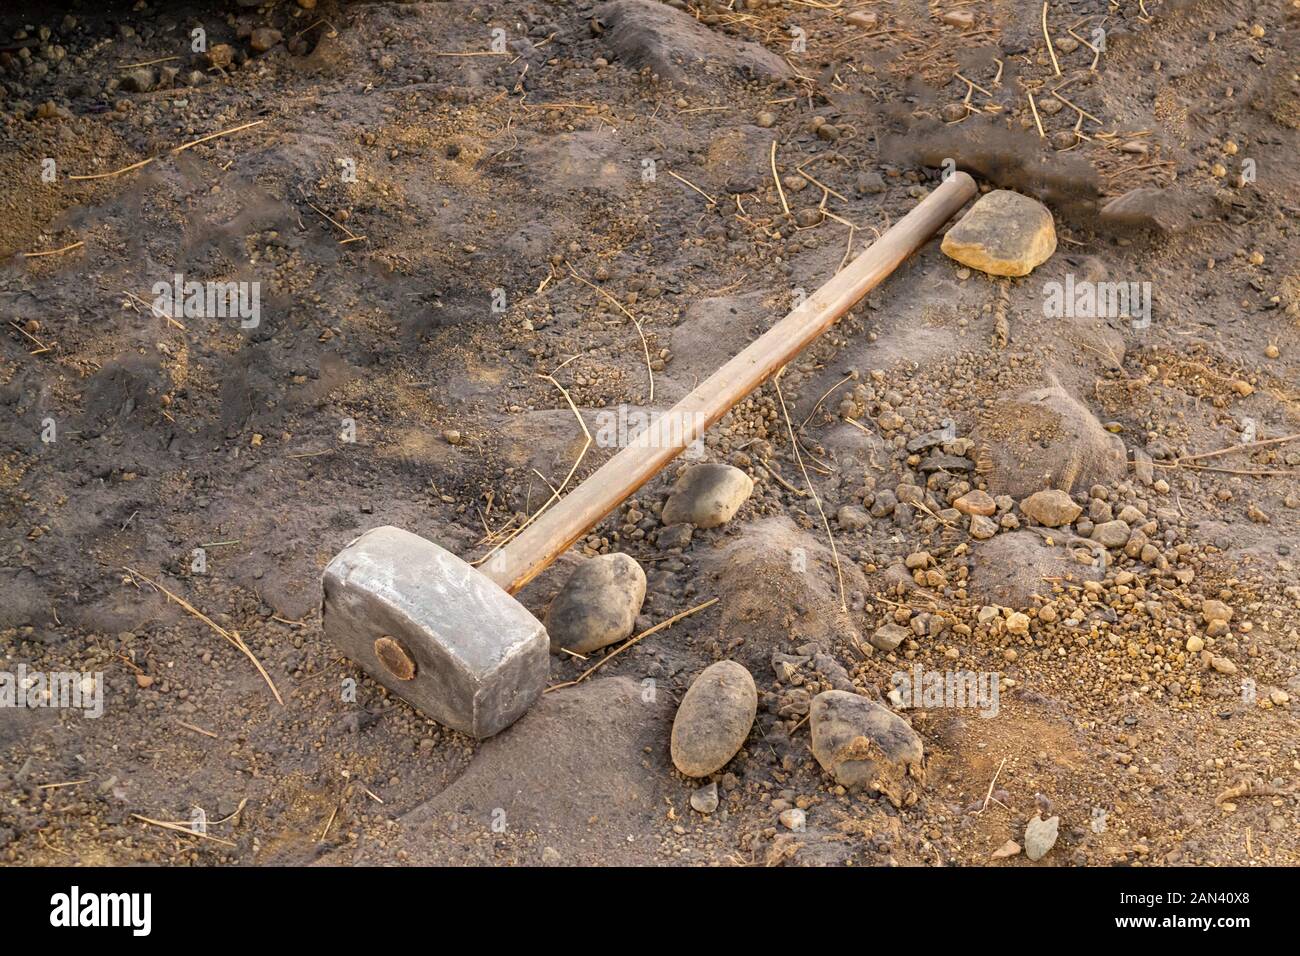 Dirty sledgehammer on soil and sand Stock Photo